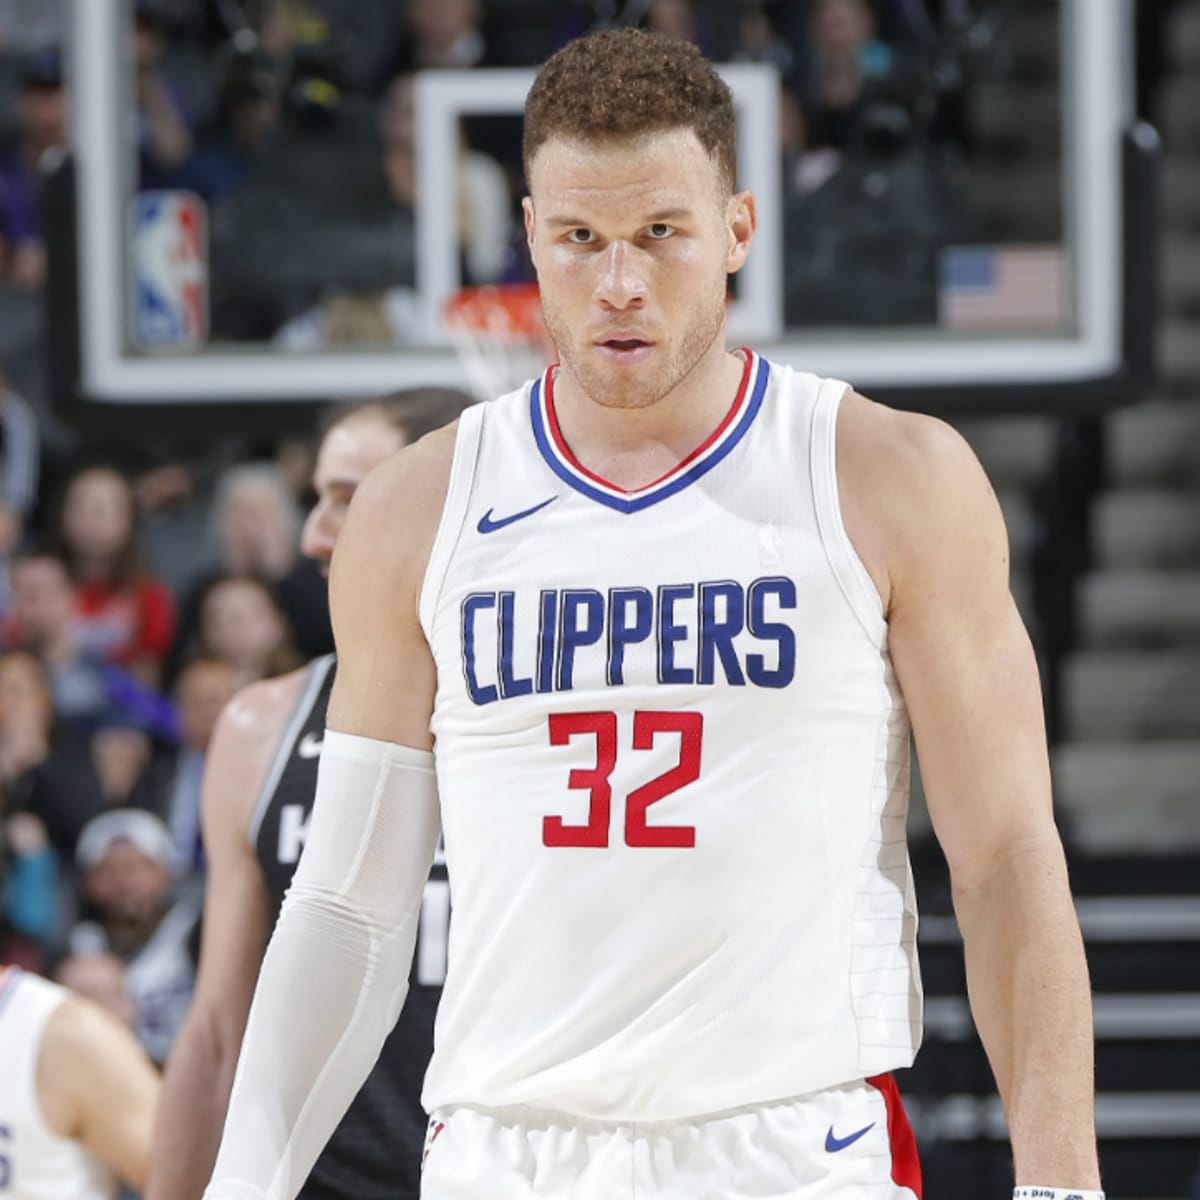 Blake Griffin Era Ends With Clippers' Cold, Abrupt Trade - Sports